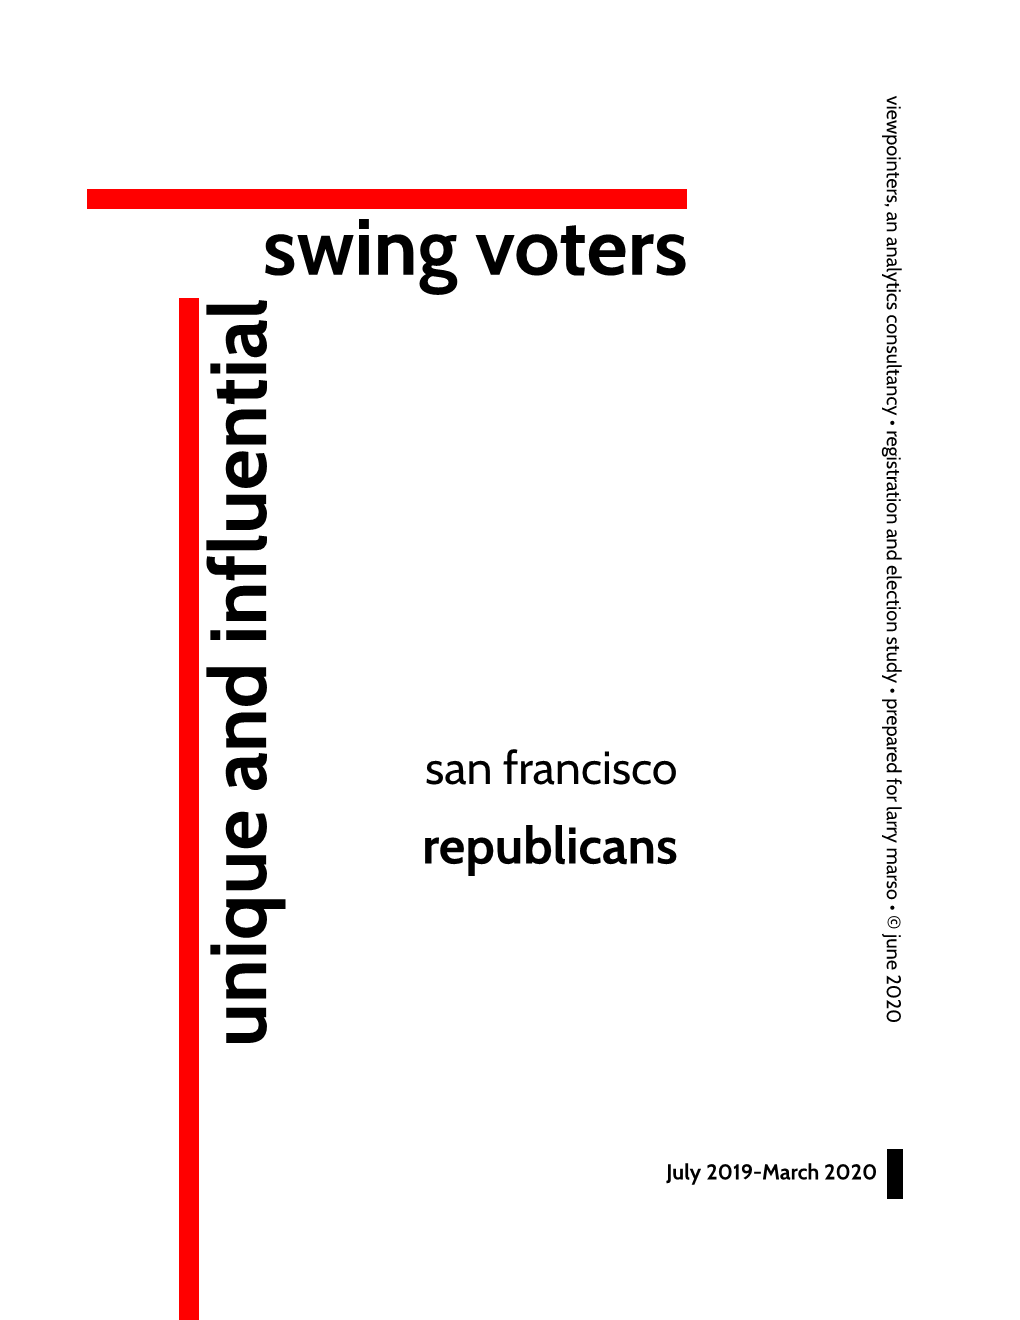 Swing Voters Unique and Influential